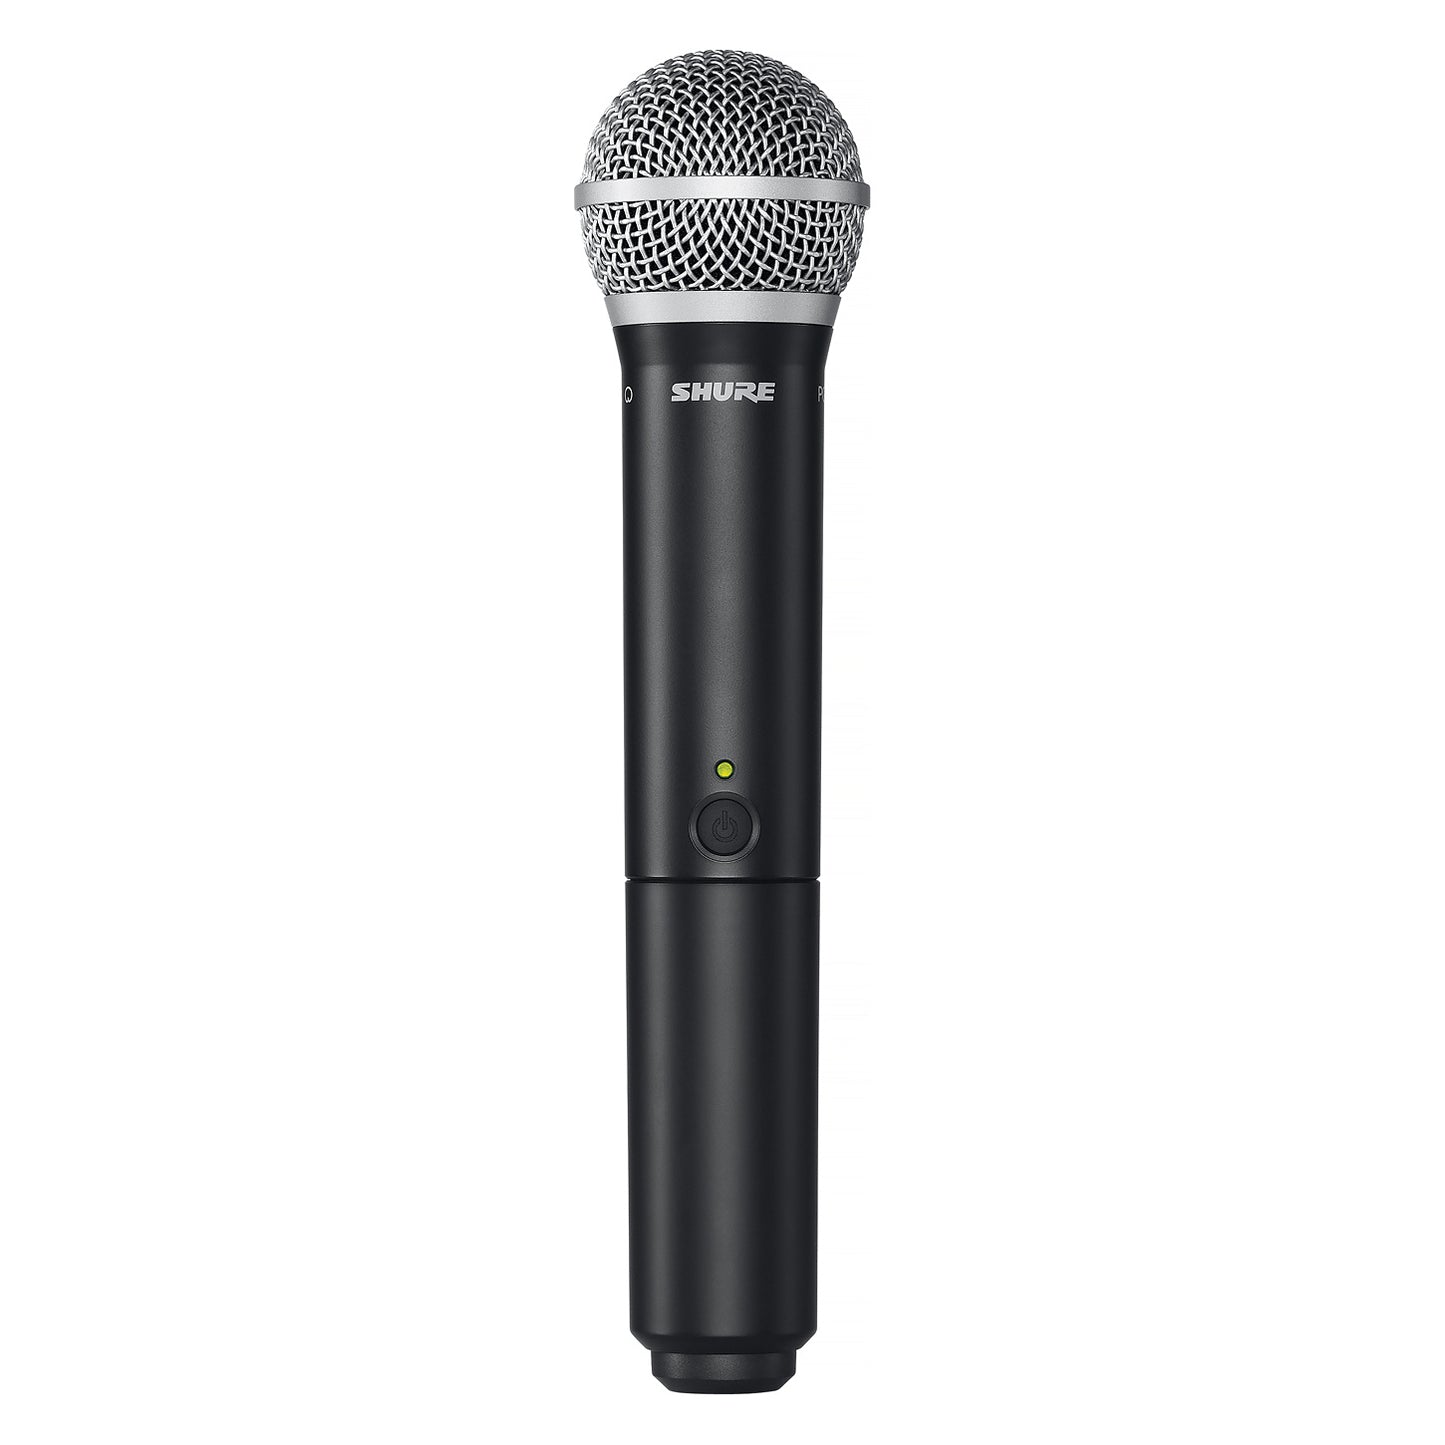 Shure BLX288/PG58 Dual Handheld Wireless PG58 Microphone System, Band H10 (542-572 MHz)